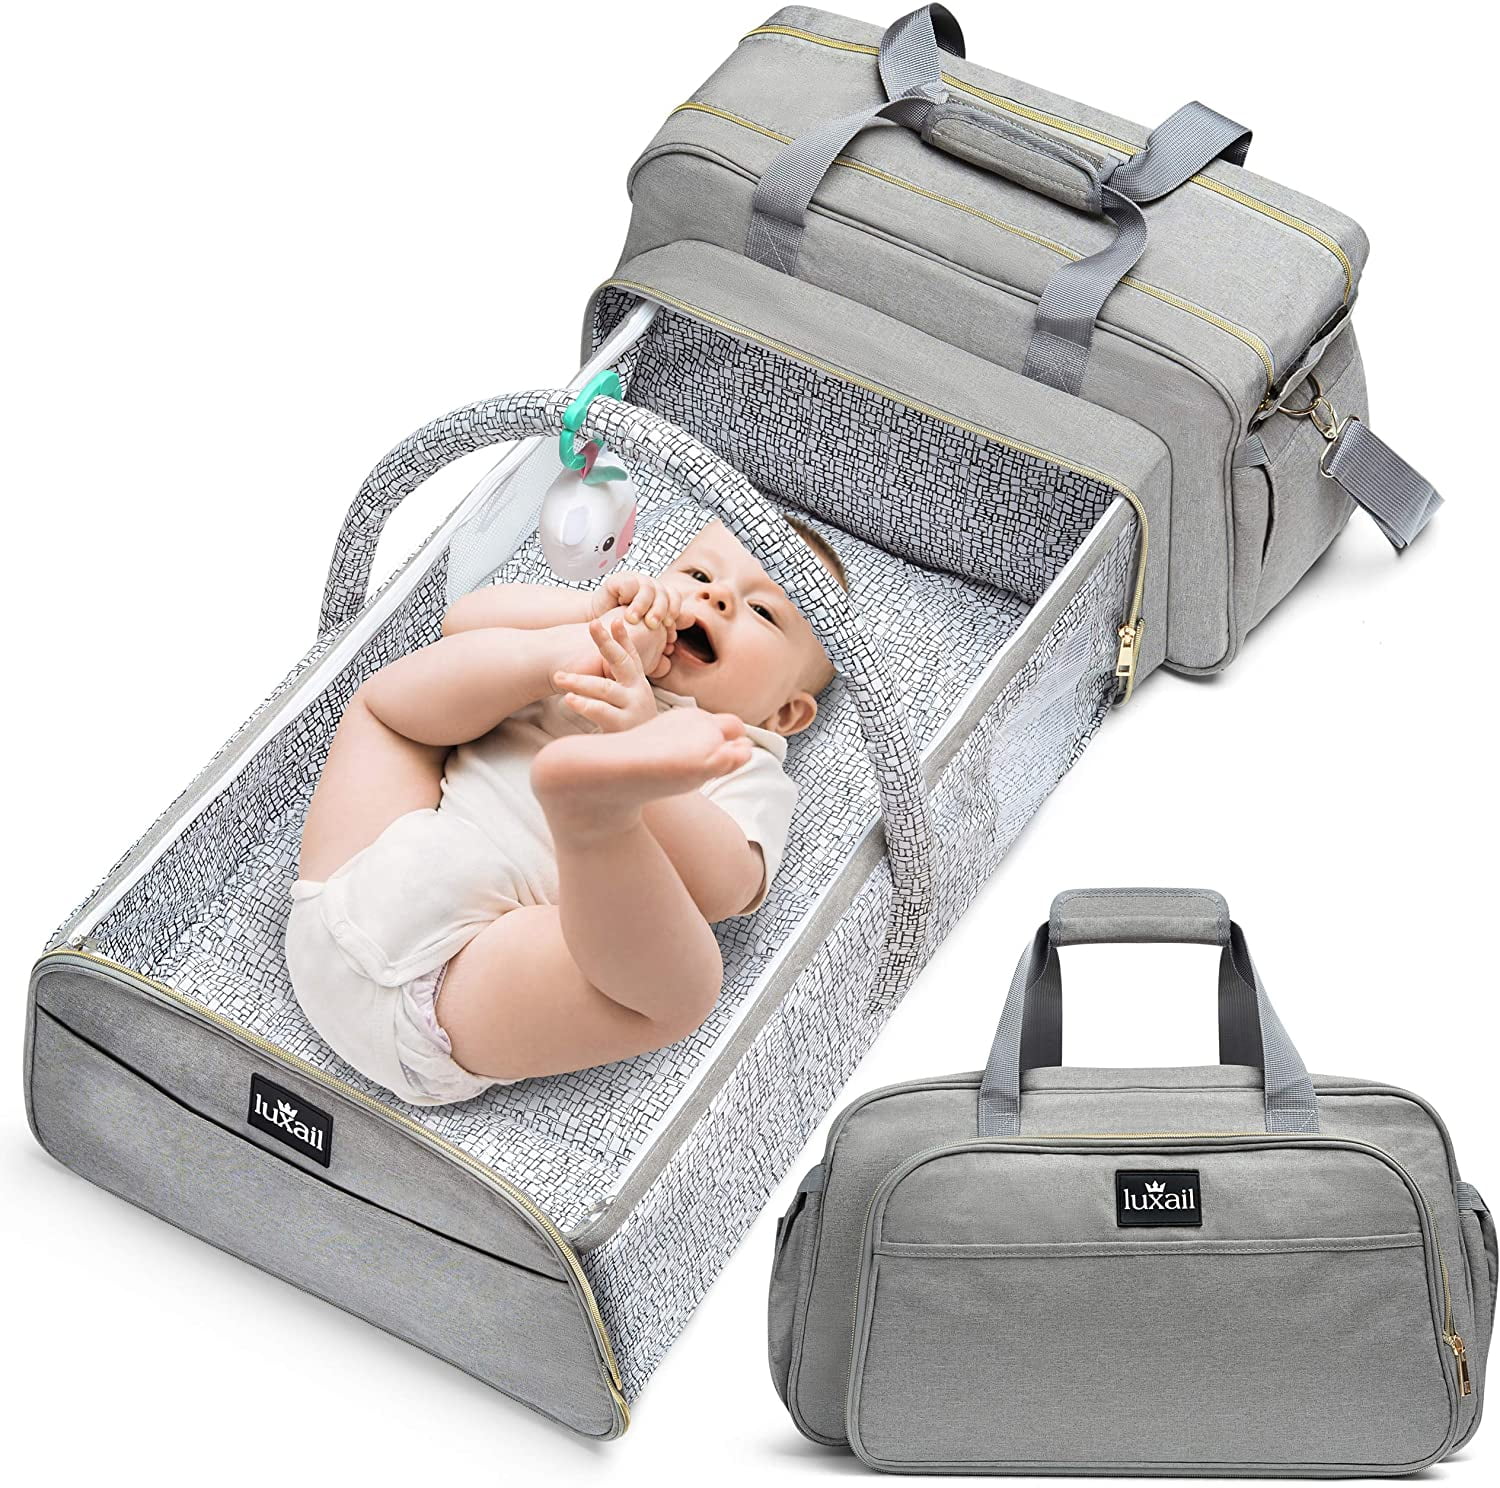 Wisewater Diaper Backpack with Foldable Baby Bed, Baby Diaper Bag